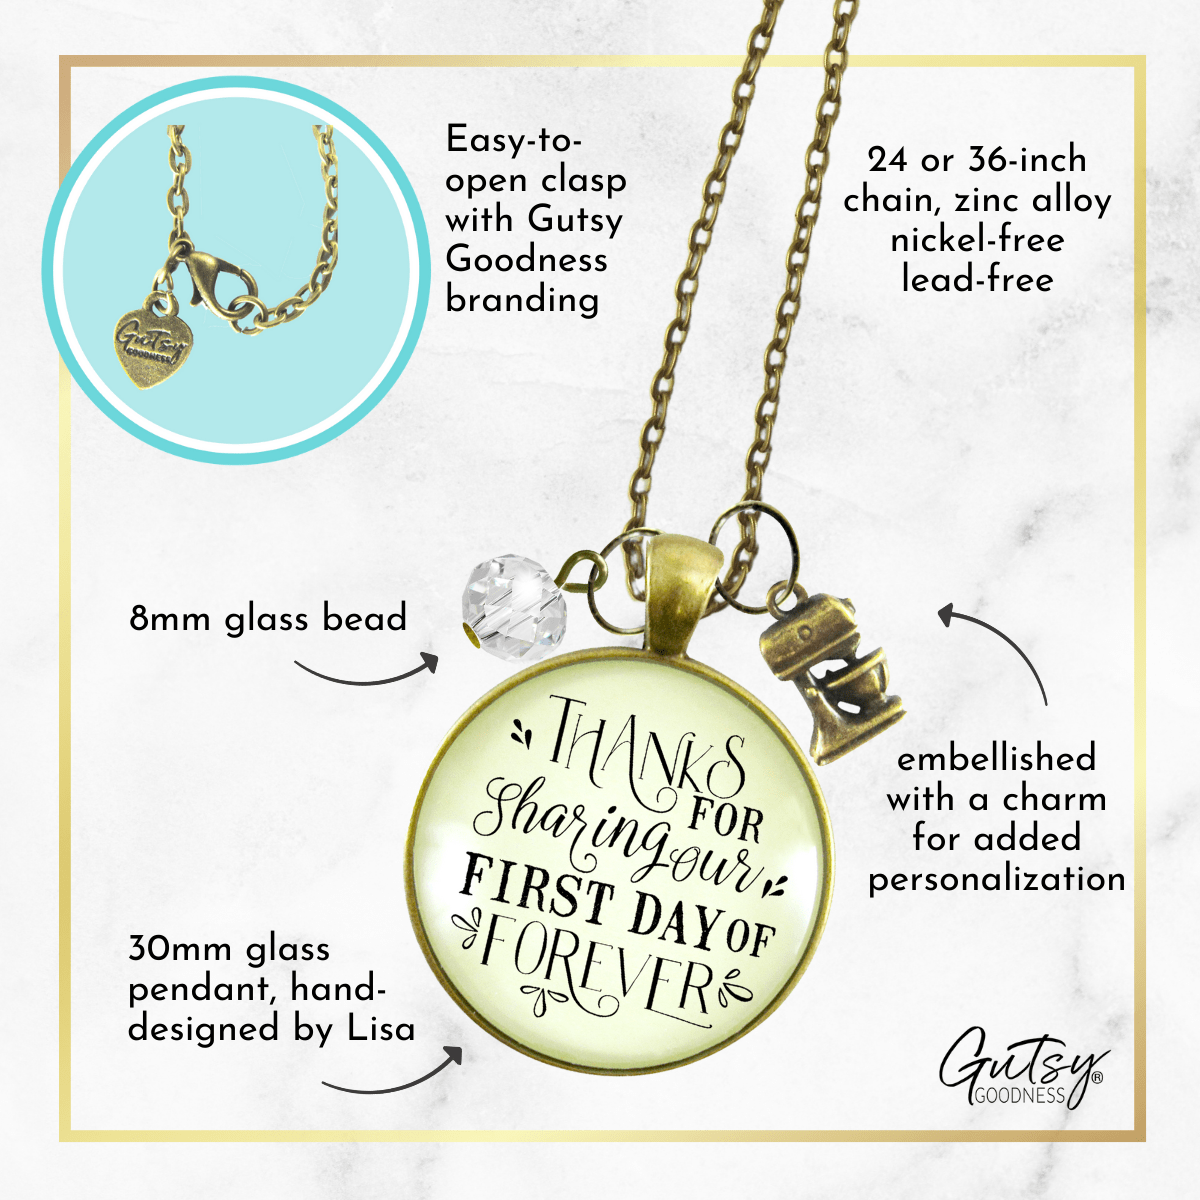 Gutsy Goodness Wedding Cake Baker Gift Necklace Thanks for Sharing Our Day Charm - Gutsy Goodness Handmade Jewelry;Wedding Cake Baker Gift Necklace Thanks For Sharing Our Day Charm - Gutsy Goodness Handmade Jewelry Gifts